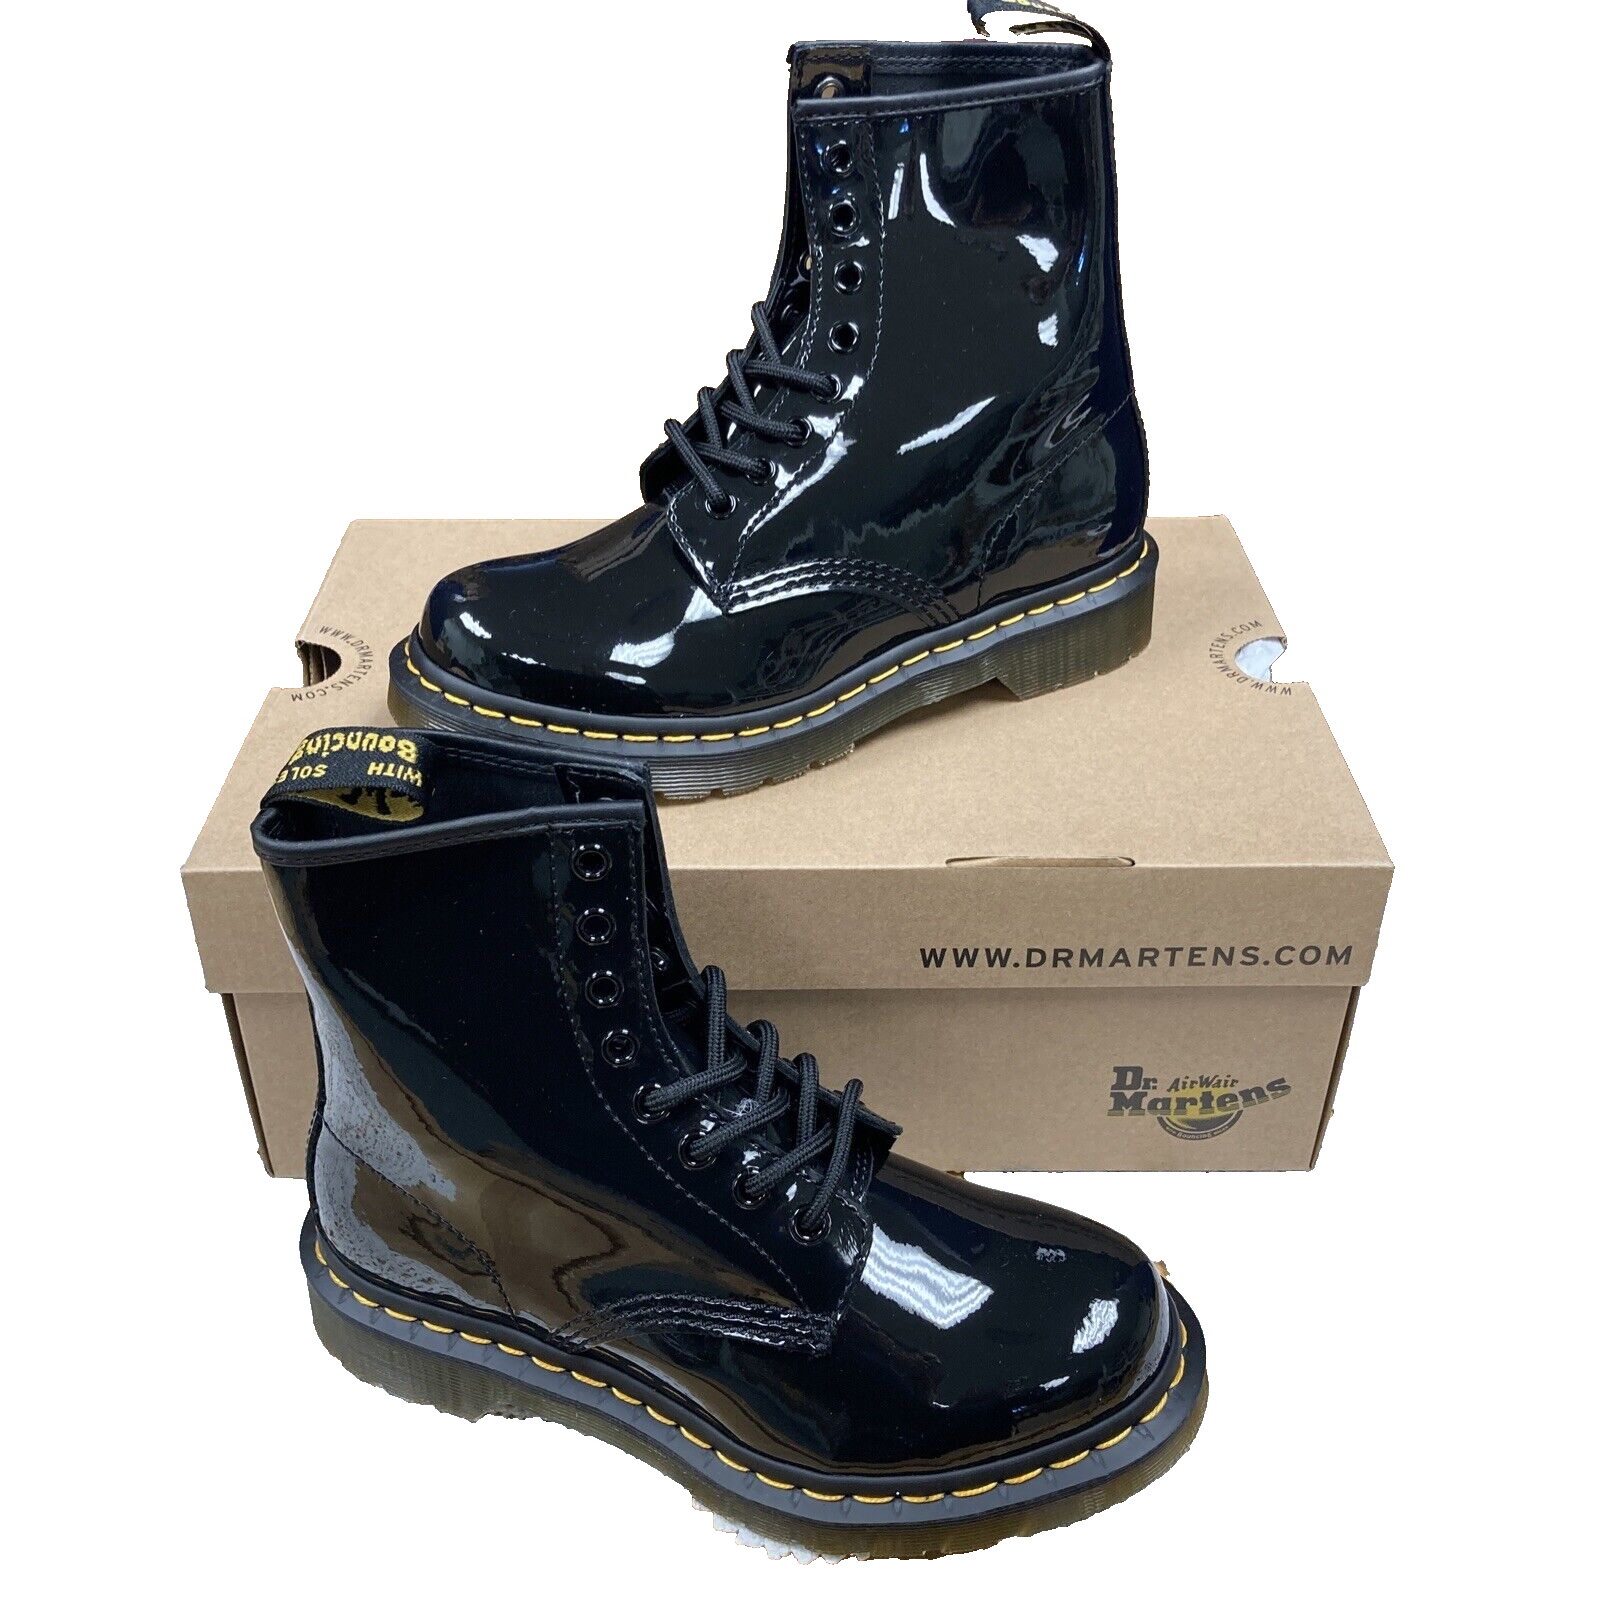 Primary image for Women's Shoes | Dr. Martens 1460 | 8 Eye Boots | Black Patent Lamper | Size 6